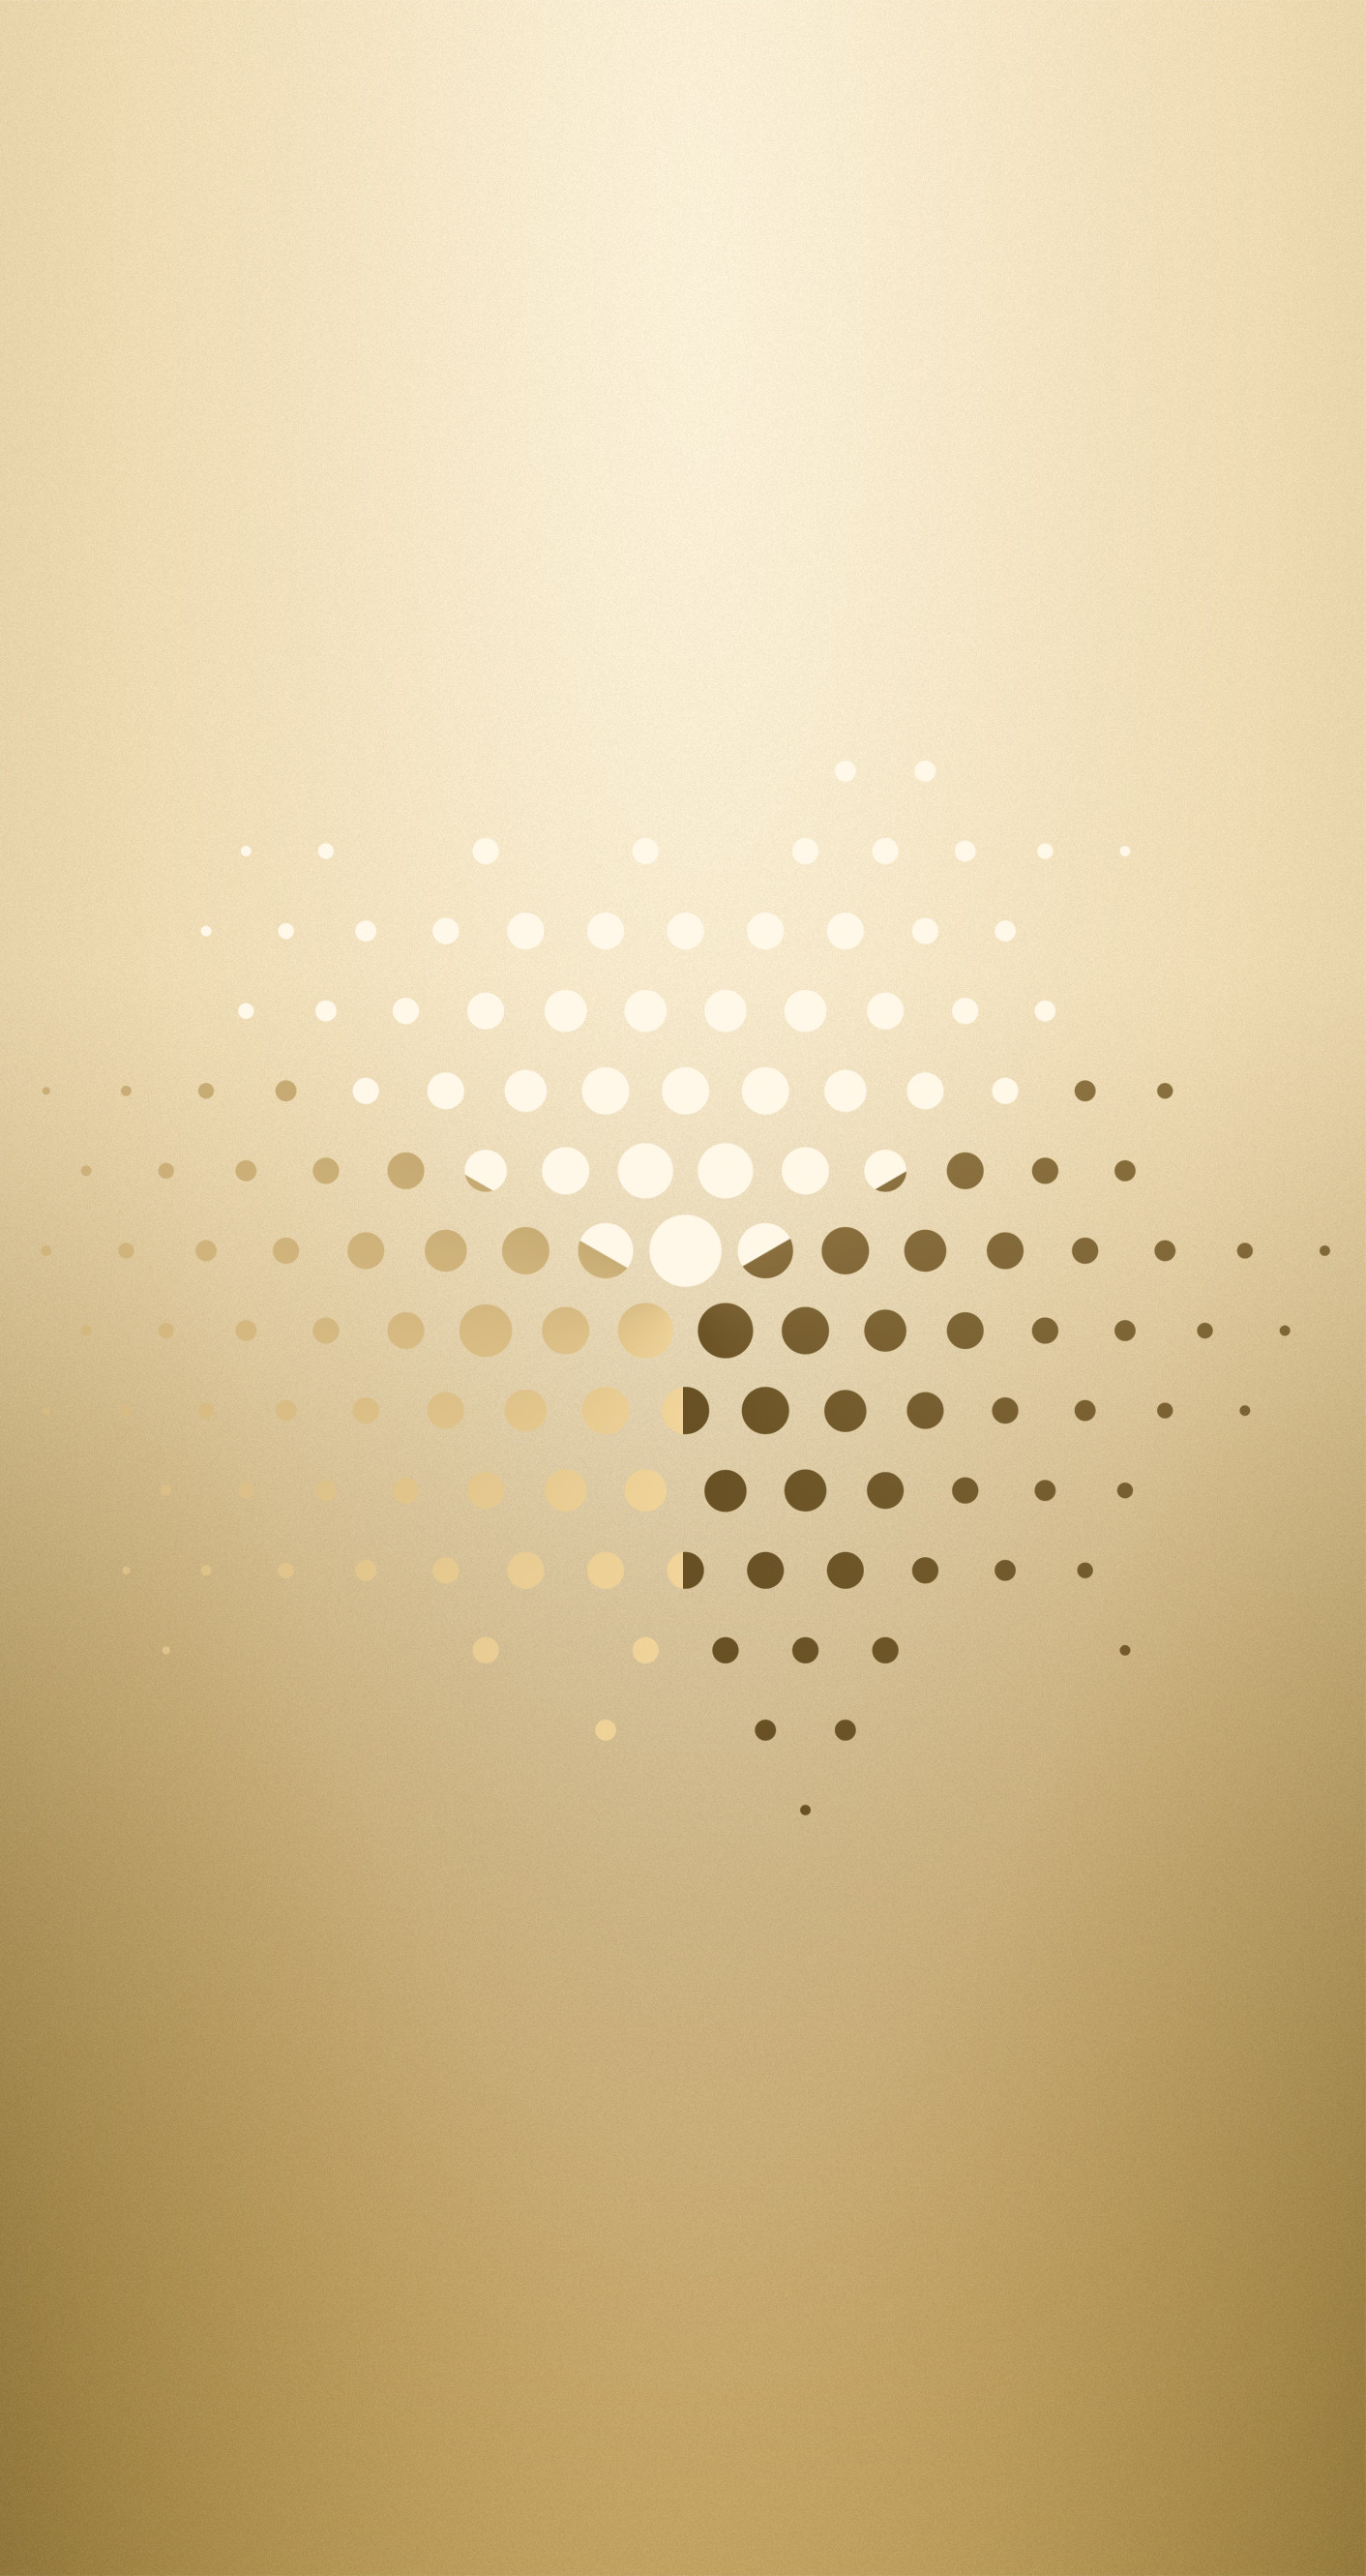 Gold: Exclusive Apple Watch-inspired wallpapers by Jason Zigrino / Find  more Classy #